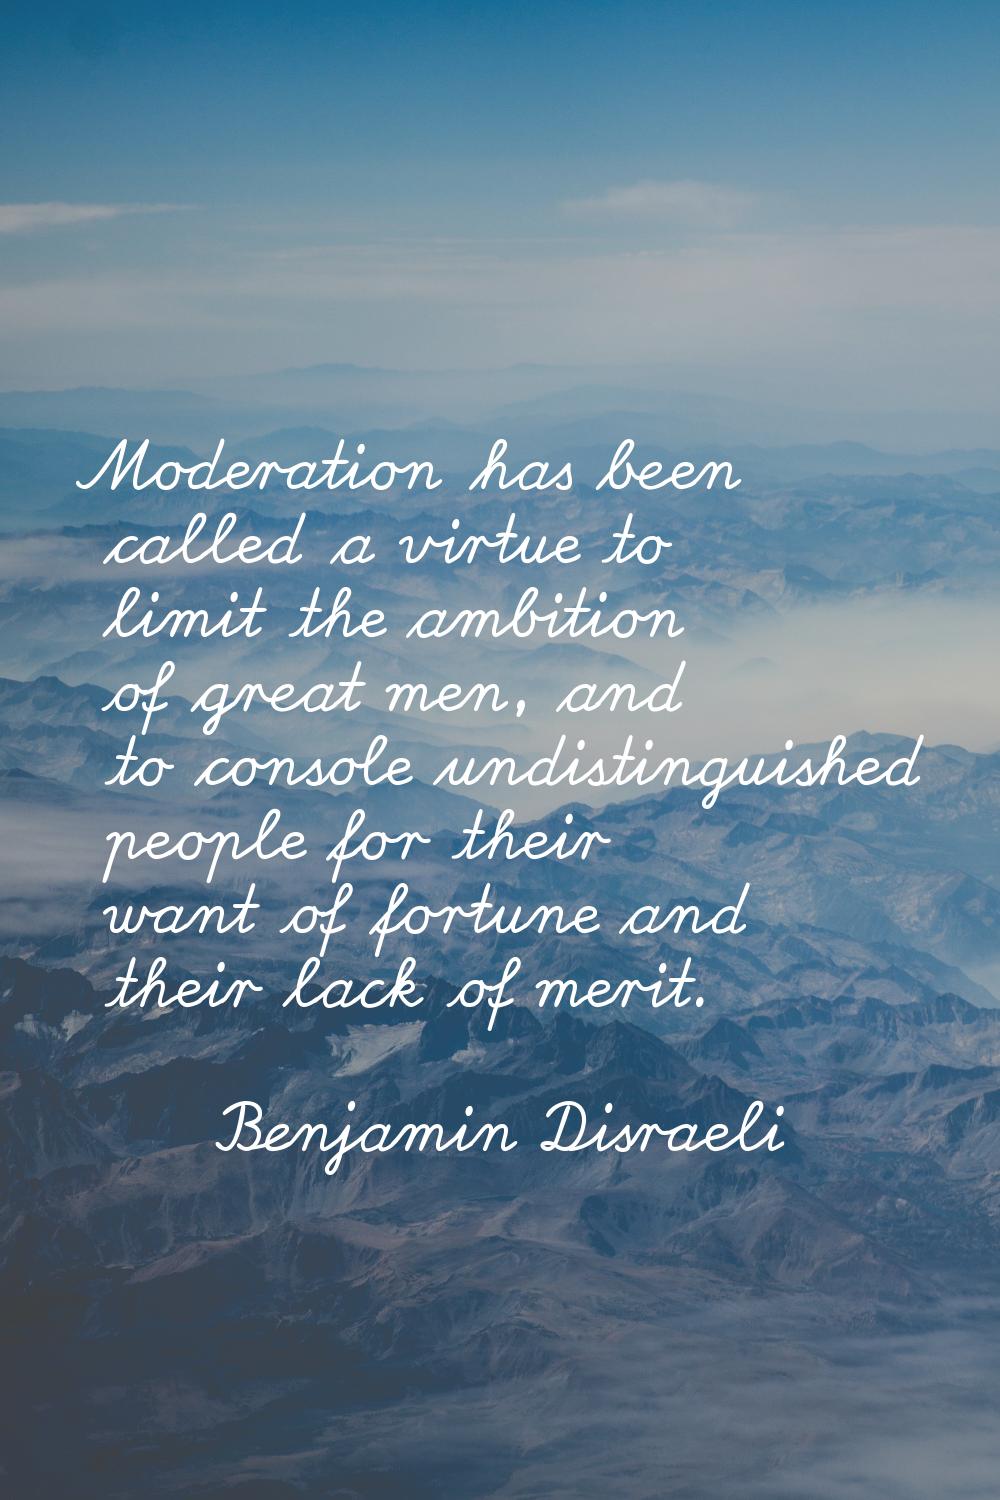 Moderation has been called a virtue to limit the ambition of great men, and to console undistinguis